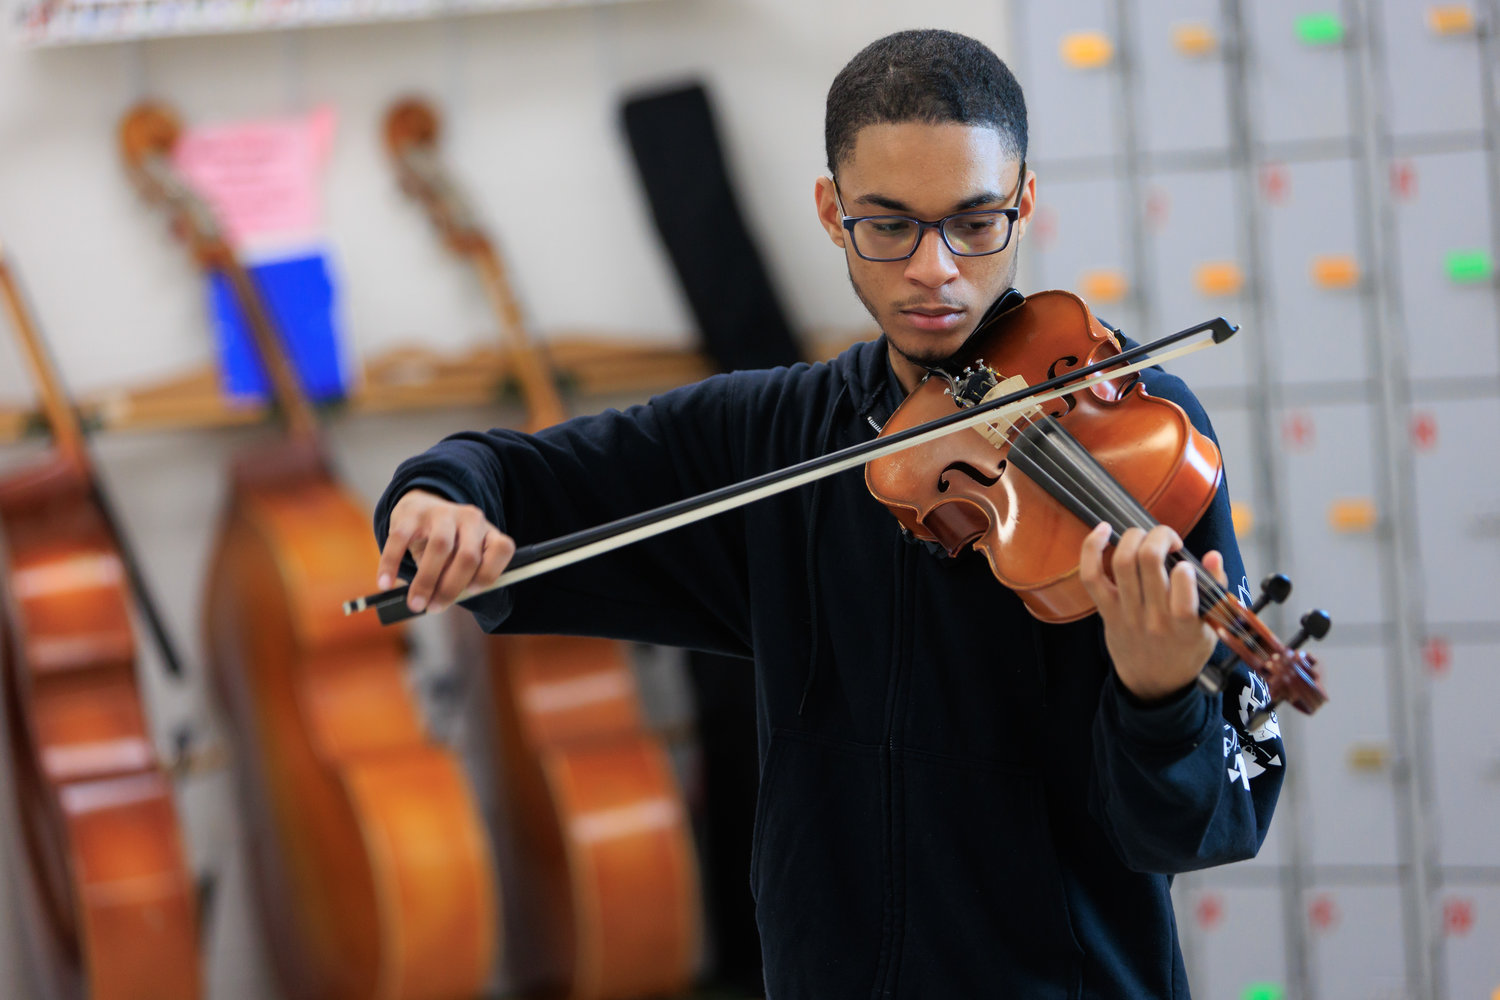 In addition to being an accomplished violist, Miles Fowler has composed music and hopes to continue to do so in his music career.